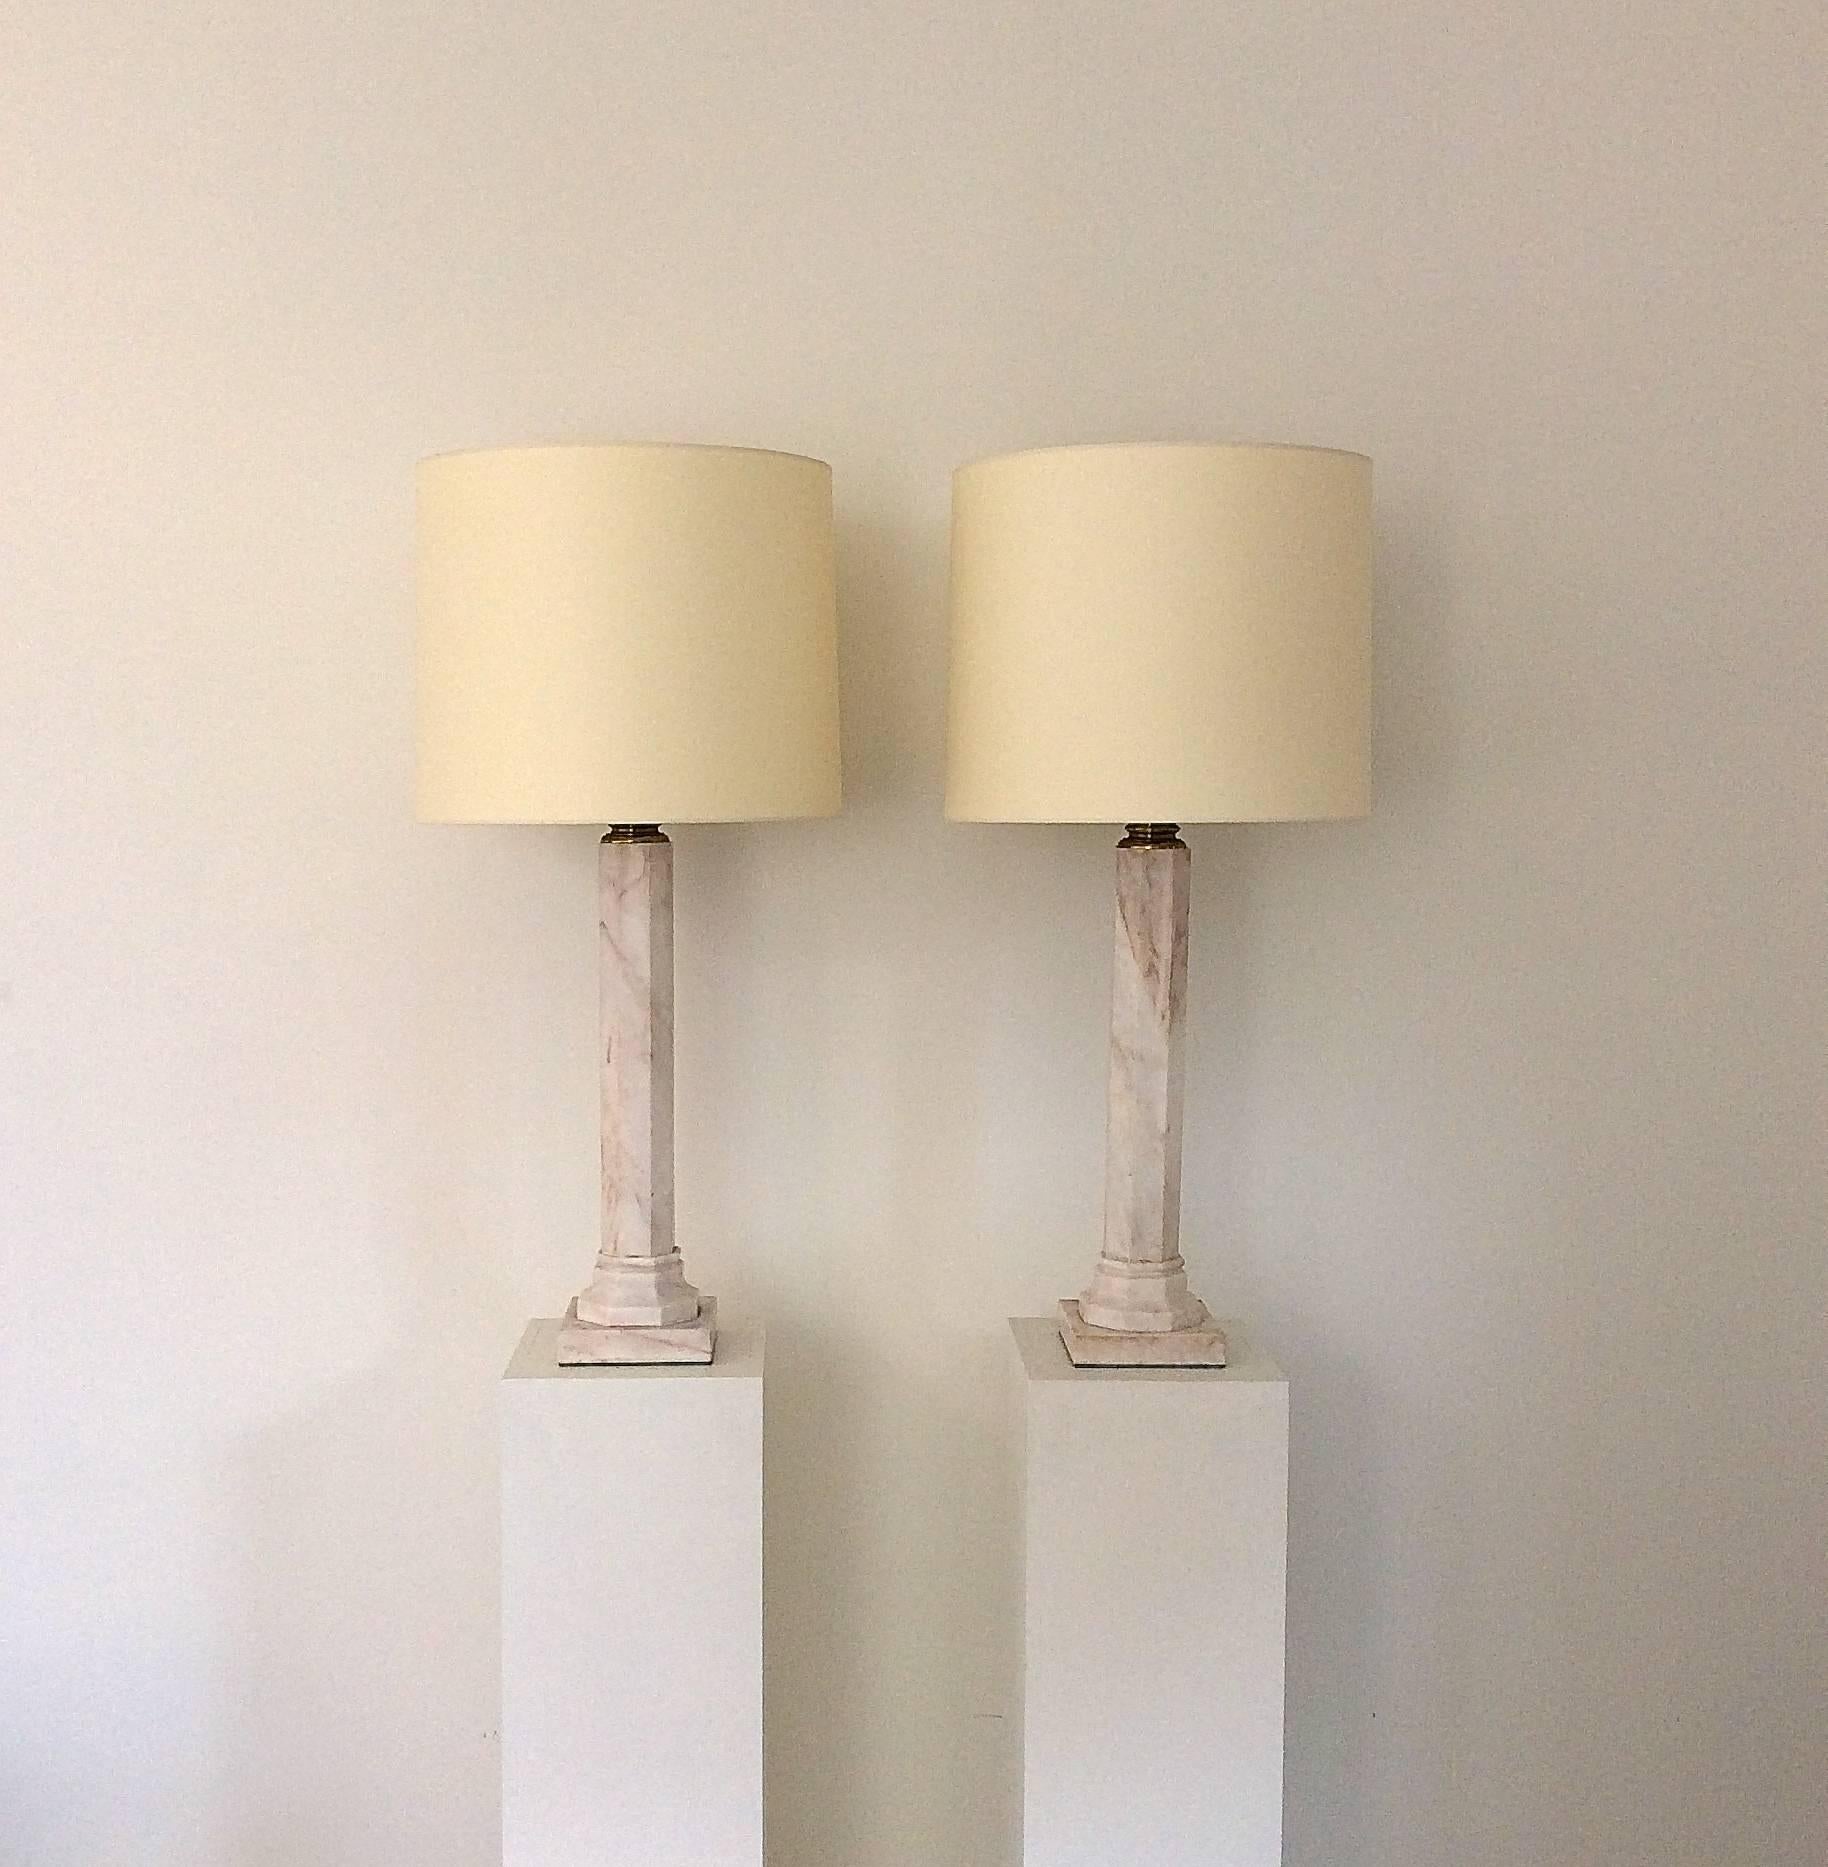 Jan Vlug pair of large table lamps, white marble and brass.
New ivory fabric shades.
Rewired, five E 27 bulbs of 40 w.
Dimensions: H: 104 cm, diameter 50 cm, base: 18 x 18 cm.
Good condition.
We ship anywhere in the world, please feel free to